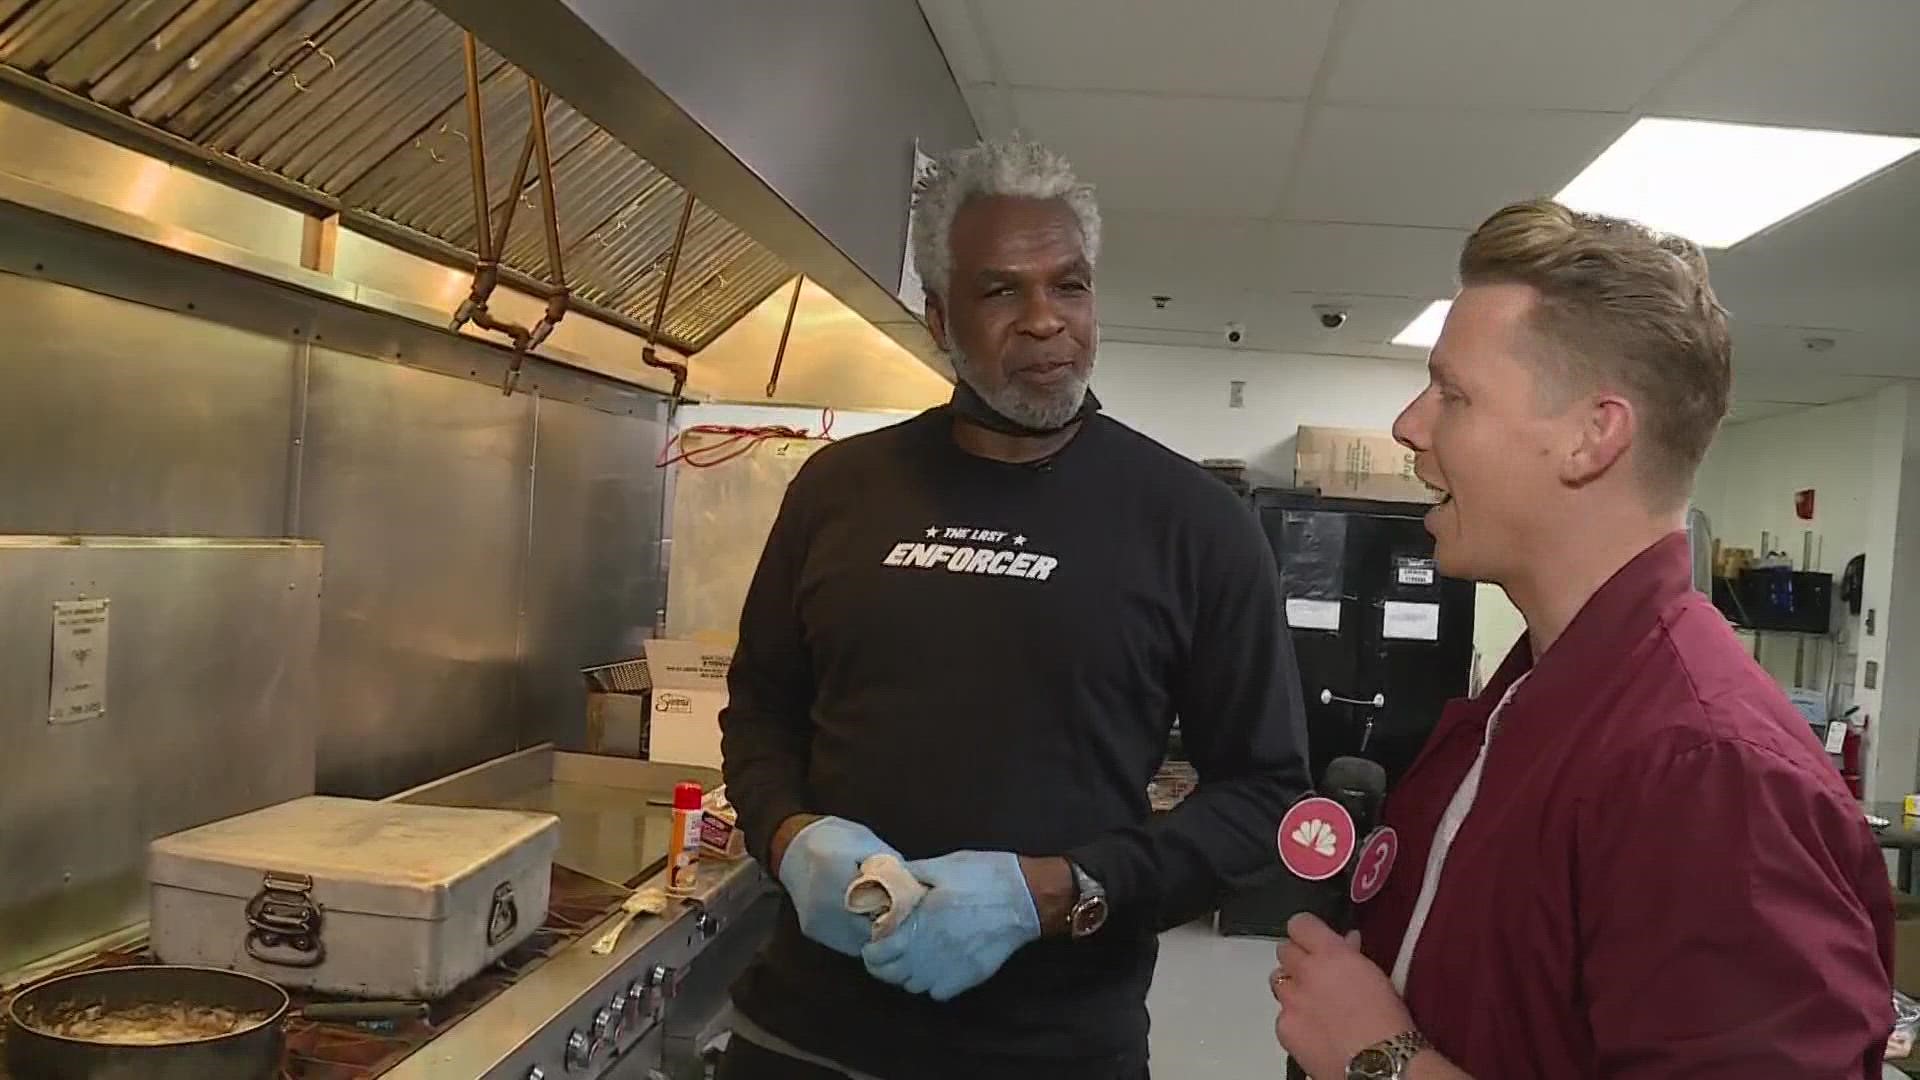 NBA legend and Cleveland native Charles Oakley gave back to the Cleveland community by cooking for the homeless in Cleveland.